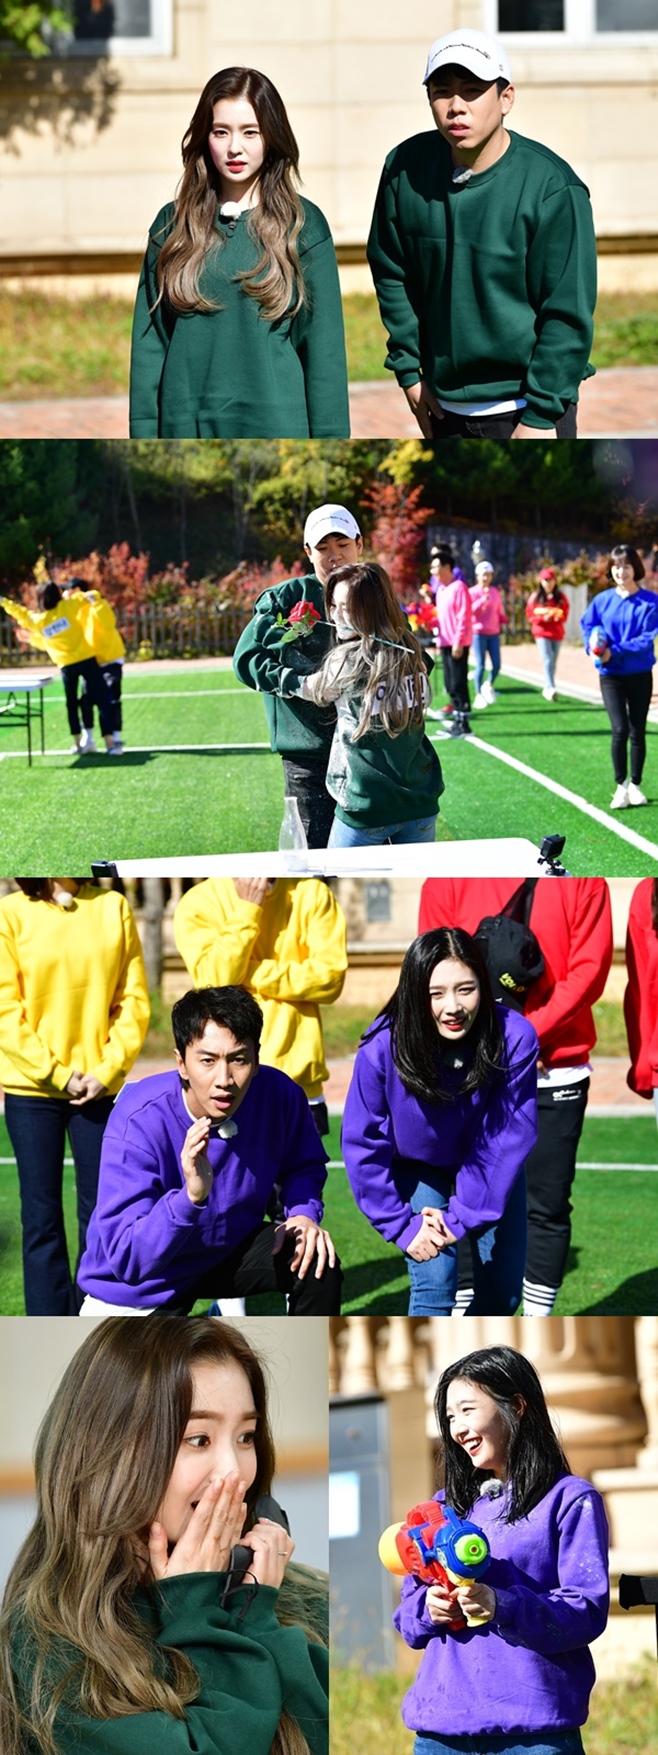 In Running Man, group Red Velvet Irene and Joy played the pole and pole.On the 25th, SBS entertainment program Running Man will feature Boiler Couple Irene and comedian Yang Se-chan.Yang Se-chan, who has been attracting attention with Irene and shocking synthetic photos in the last broadcast, said, (Oh! Oh! This picture is coming out! (I) Irene will put you to sleep in warm! (Lin) Lin!I was cheered by everyone, receiving the choice of Irene.After the broadcast, the netizens also praised Yang Se-chans three-way poem and expressed expectations for an unexpected boiler couple.In the anticipation of Irene and Yang Se-chans couple, Red Velvet Irene and Joy caught the members with the charm of drama and drama in the previous shoot.Irene laughed at the members by calling them Pretty Ji Suk-jin because of the charm of walking my way without understanding the rules late or bowing to the surrounding situation.On the other hand, Joy laughed at the words of the members and immediately responded to Chain Reaction Wealthy, and the members added, Joy is like a balloon at the venue because Chain Reaction is so big.The Boiler Couple Irene Yang Se-chan couples Chemie, Irene and Joys play and play will be released at Running Man, which is broadcasted at 4:50 pm on the day.